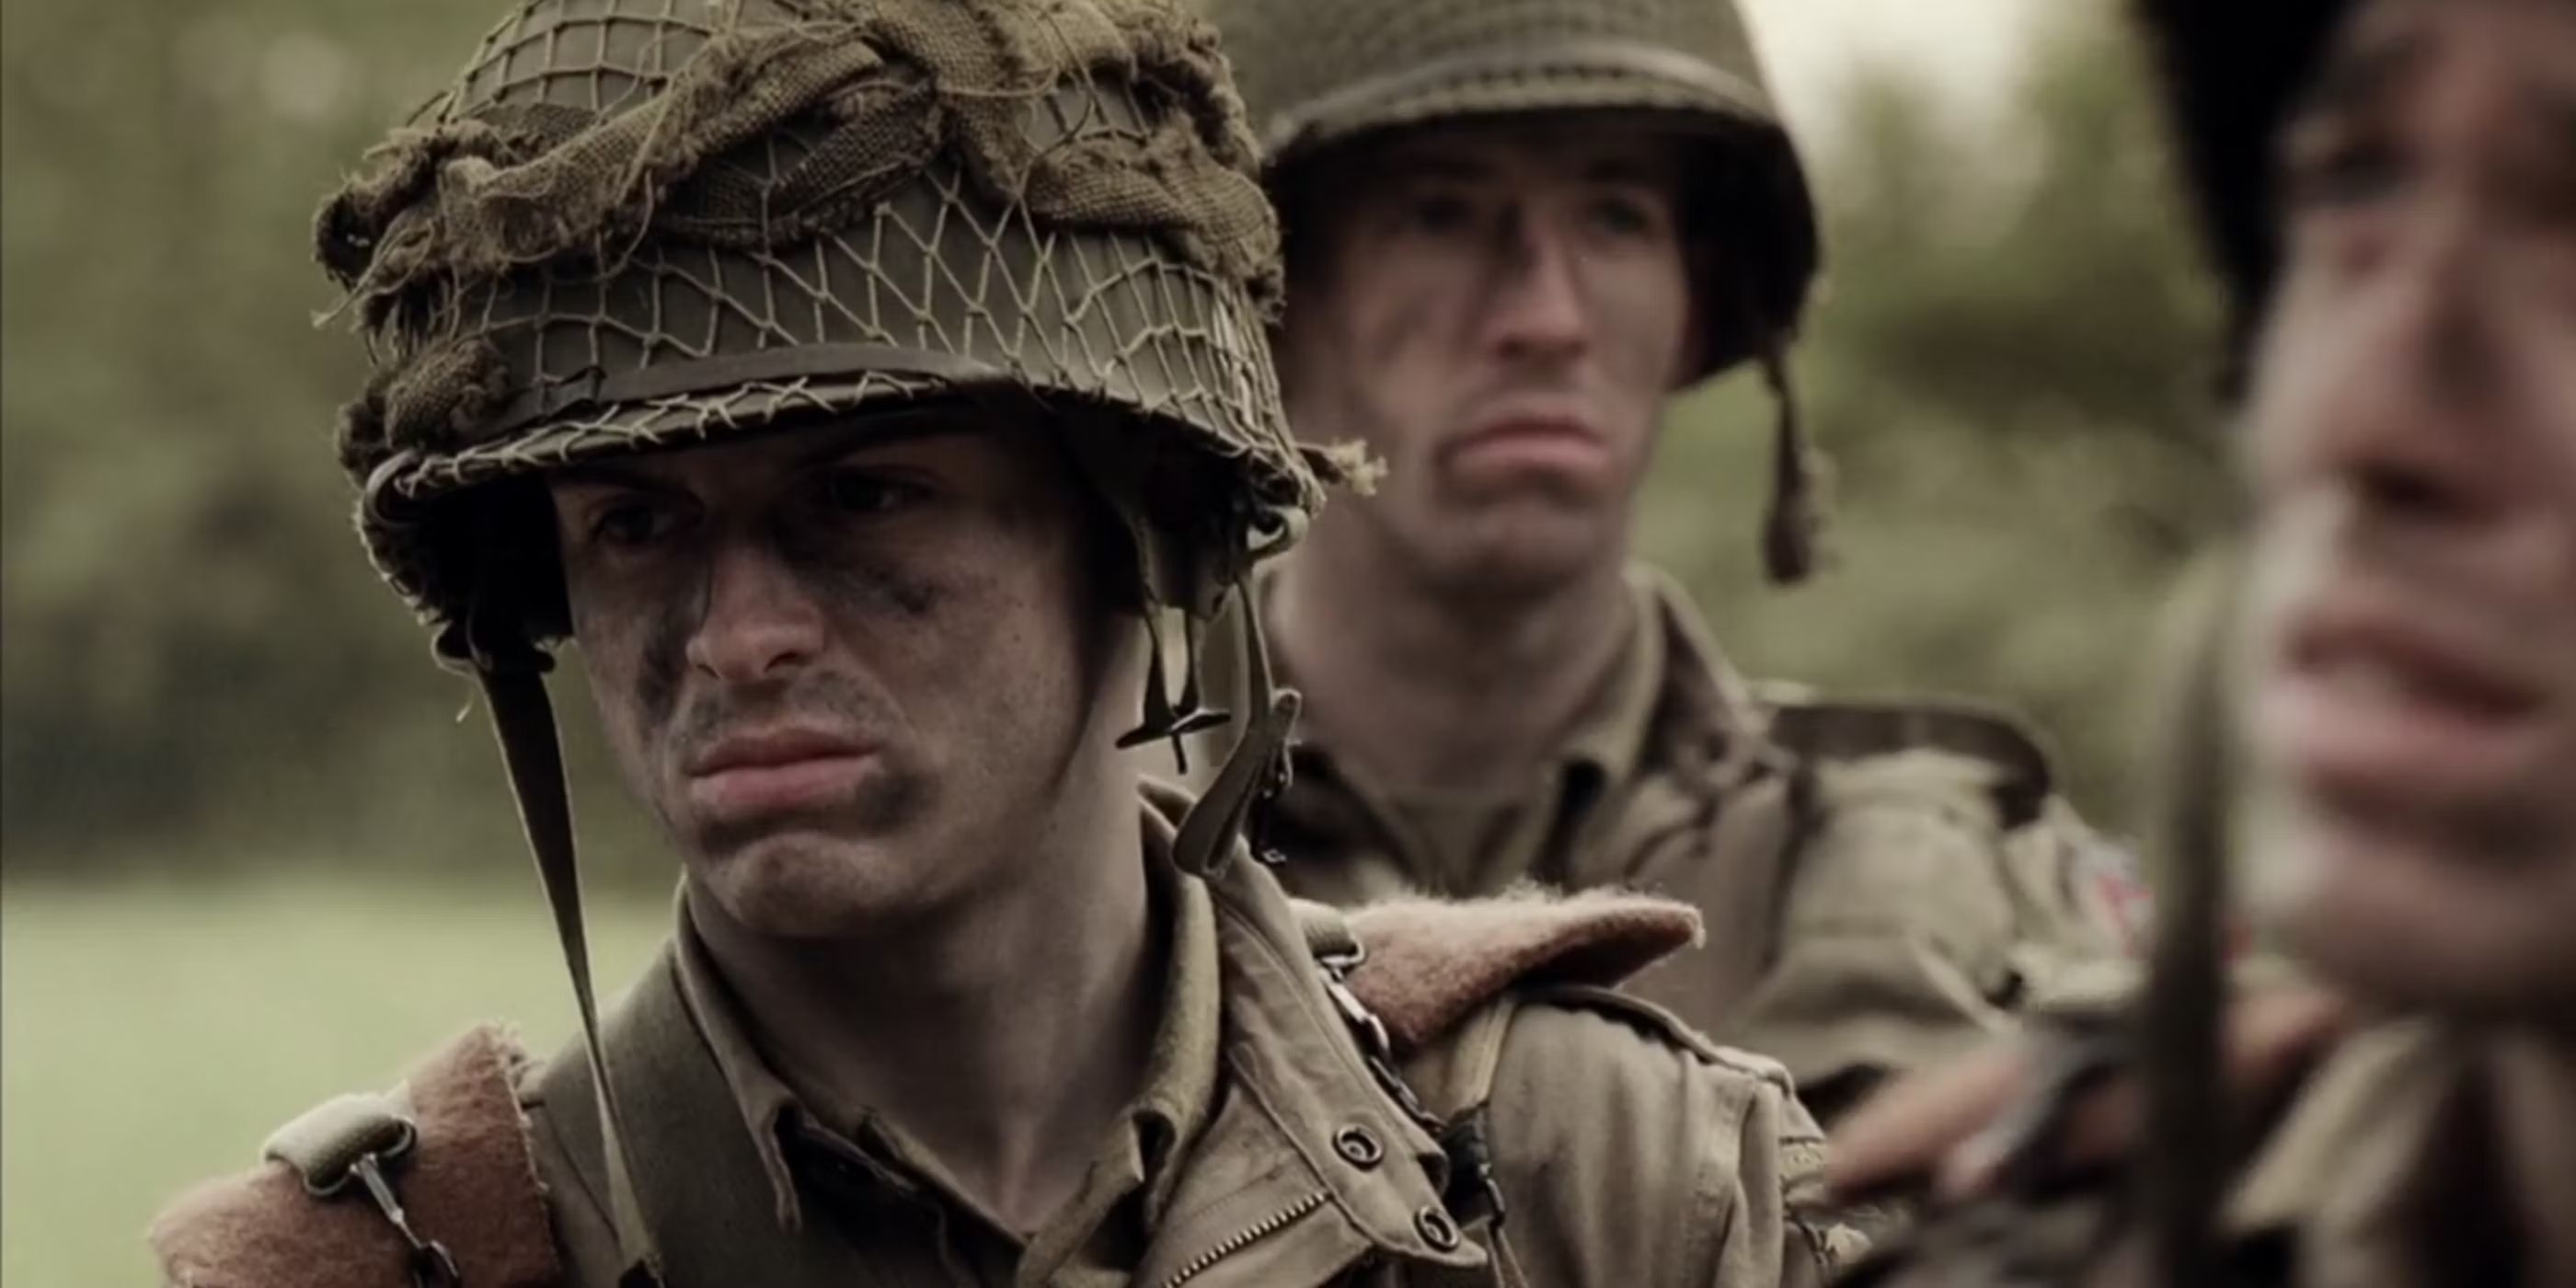 Private John "Cowboy" Hall (Andrew Scott) stands in his army gear with face camo alongside his fellow soldiers in Band of Brothers